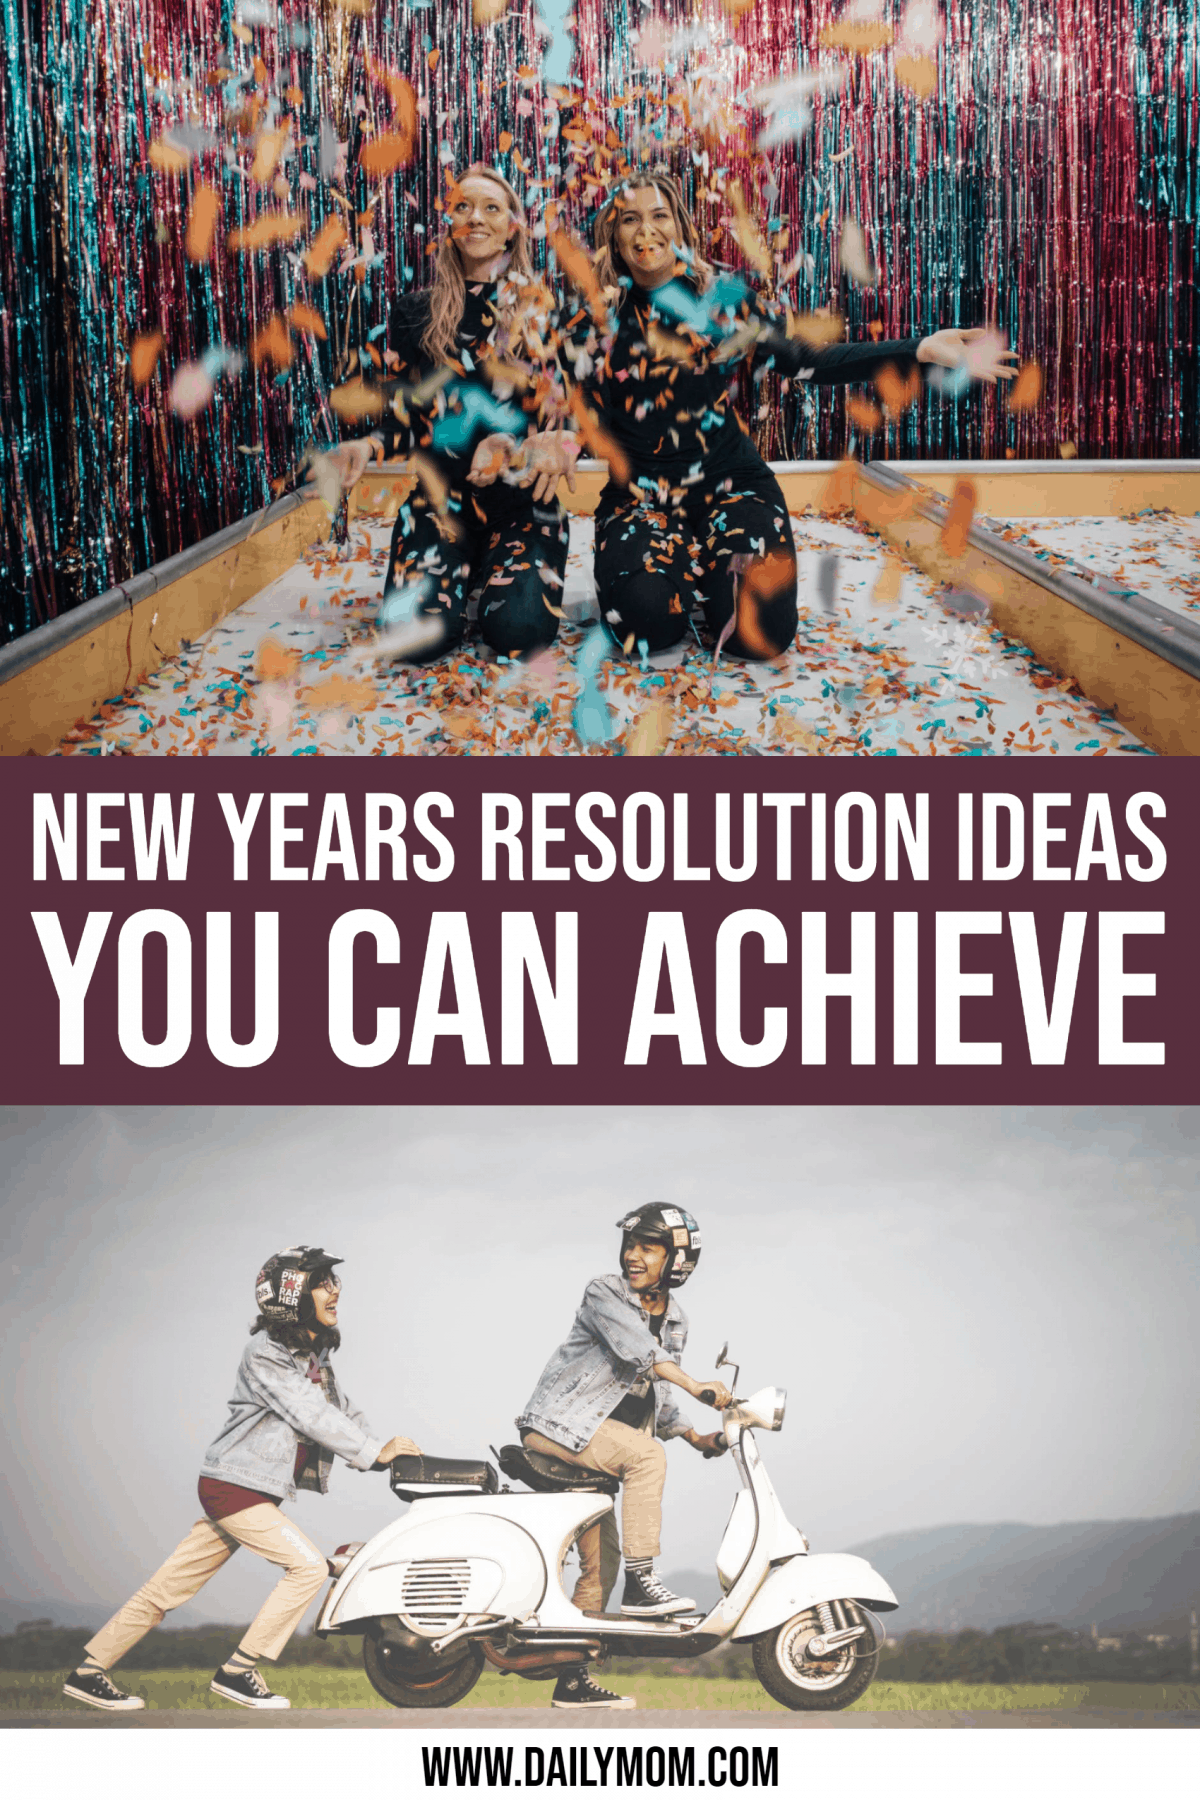 3 New Year’s Resolution Ideas That You Can Achieve